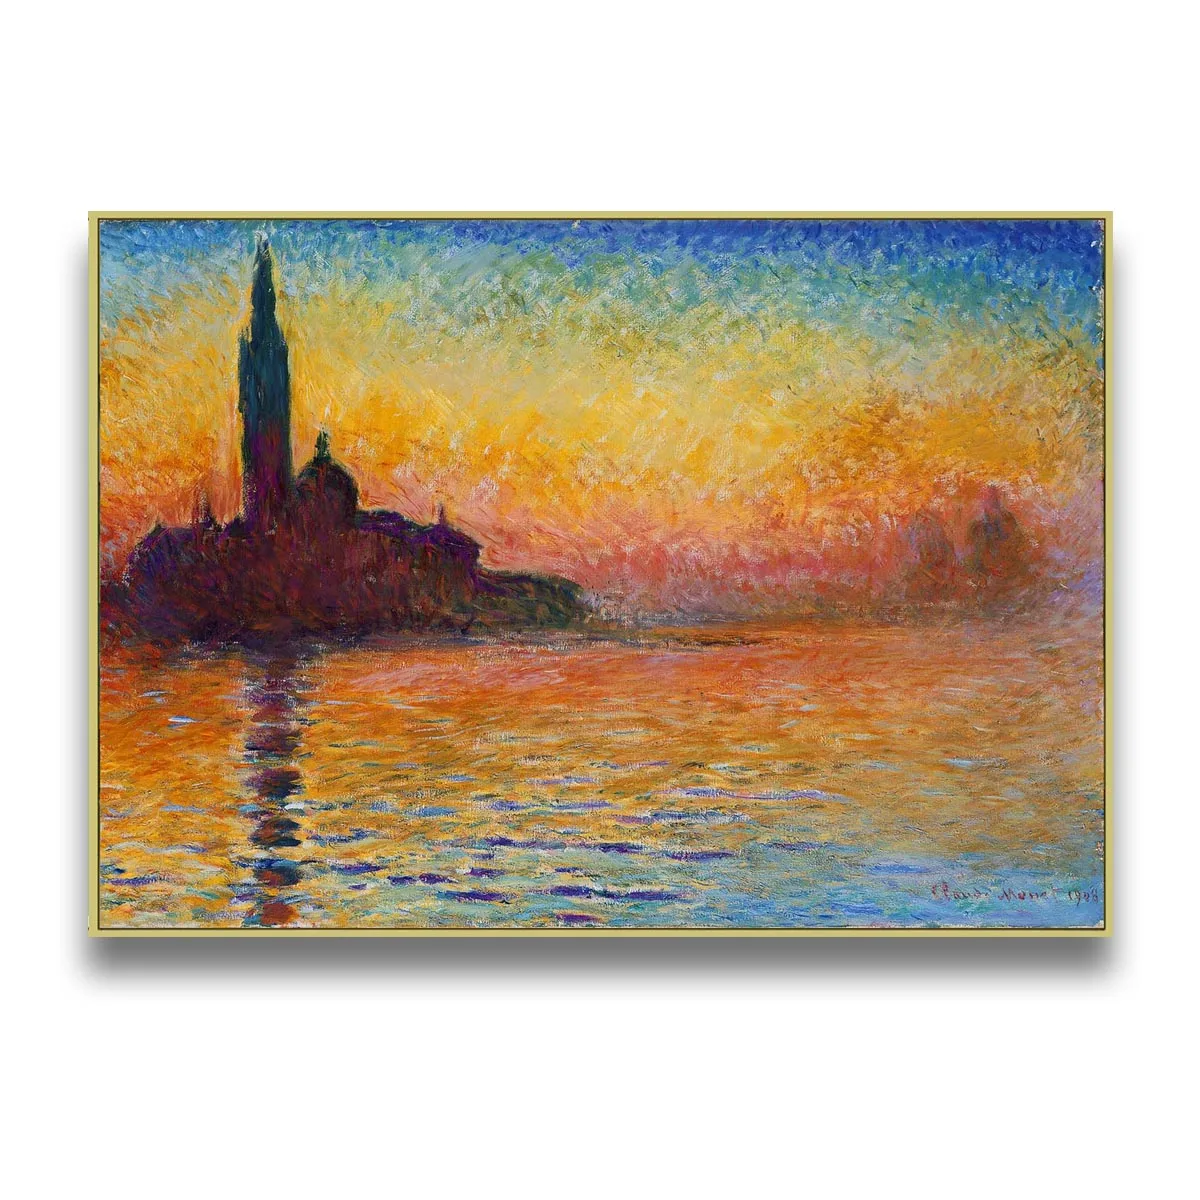 

Hand painted high quality reproduction of San Giorgio Maggiore at Dusk by Claude Monet seascape oil painting for living room